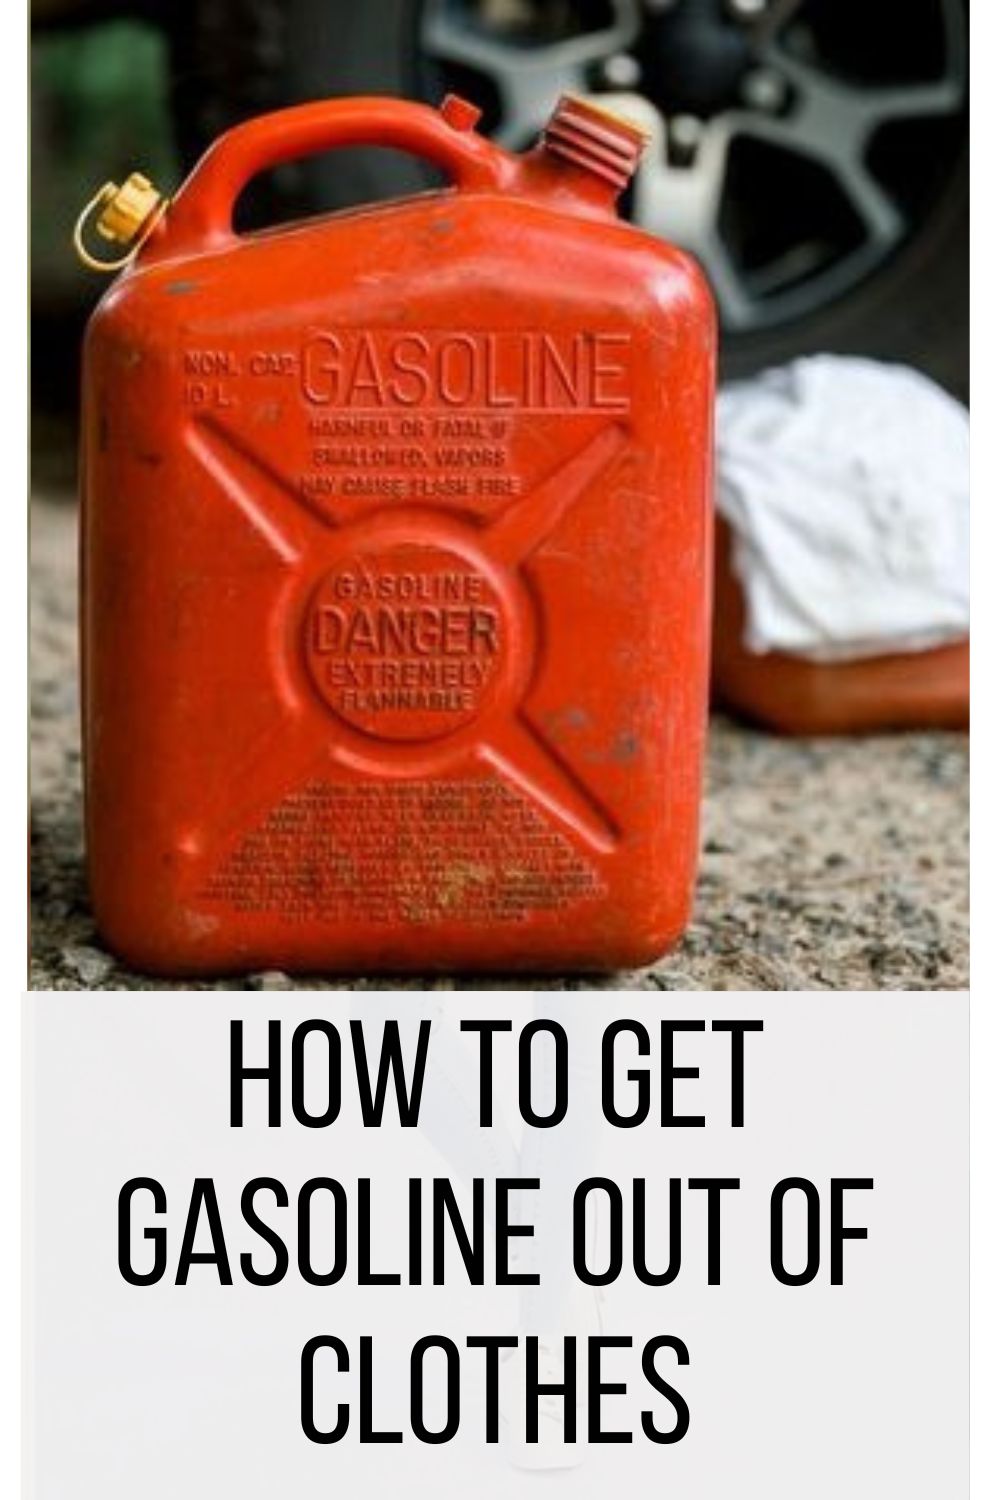 How to Get Gasoline Out of Clothes